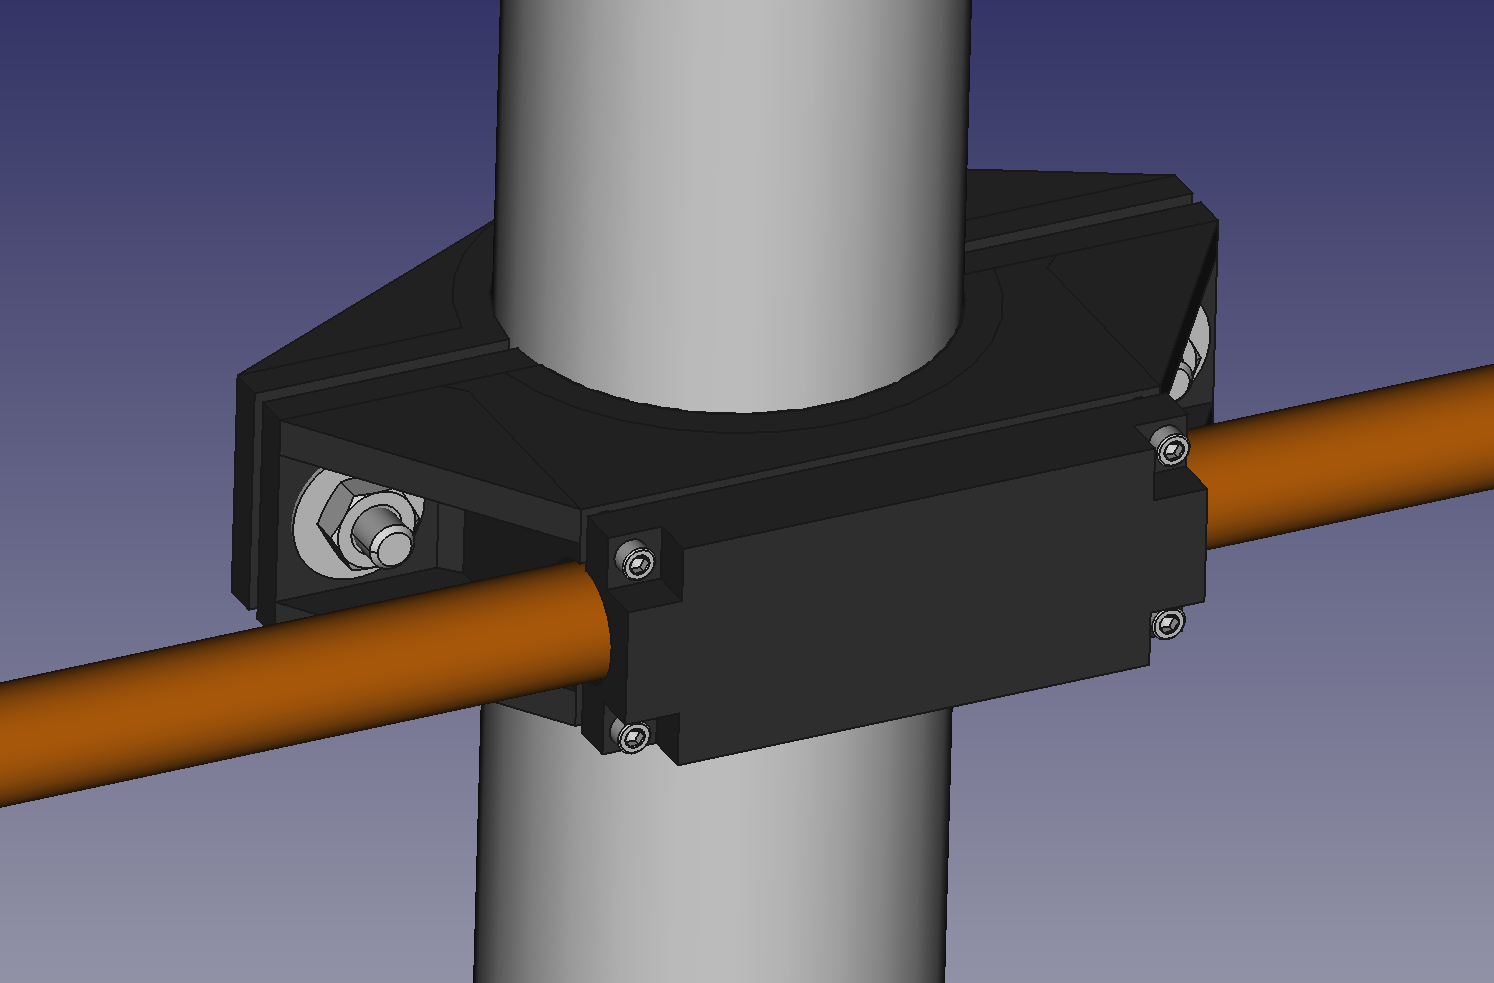 3D CAD model of the bottom copper pipe mounting bracket